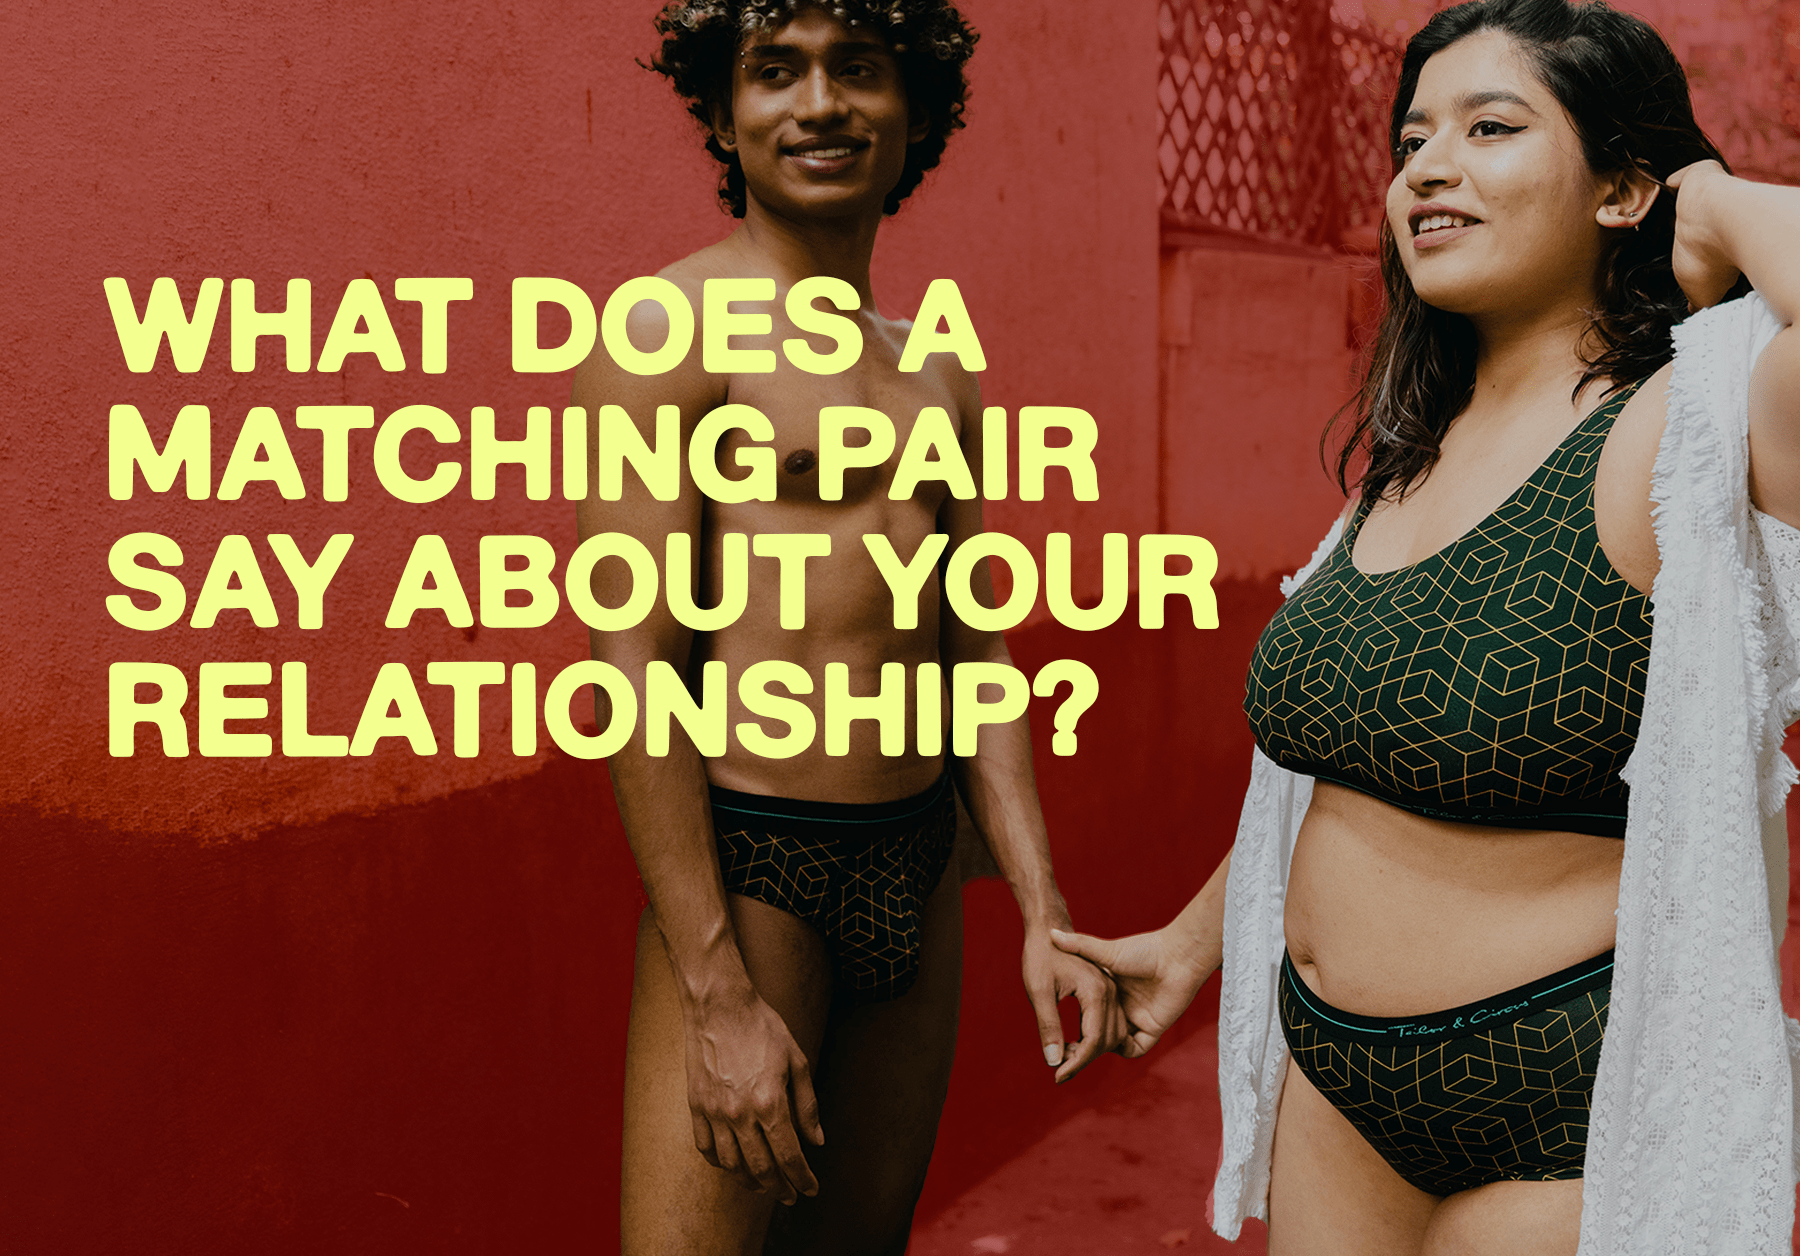 What Does a Matching Pair Say About Your Relationship?